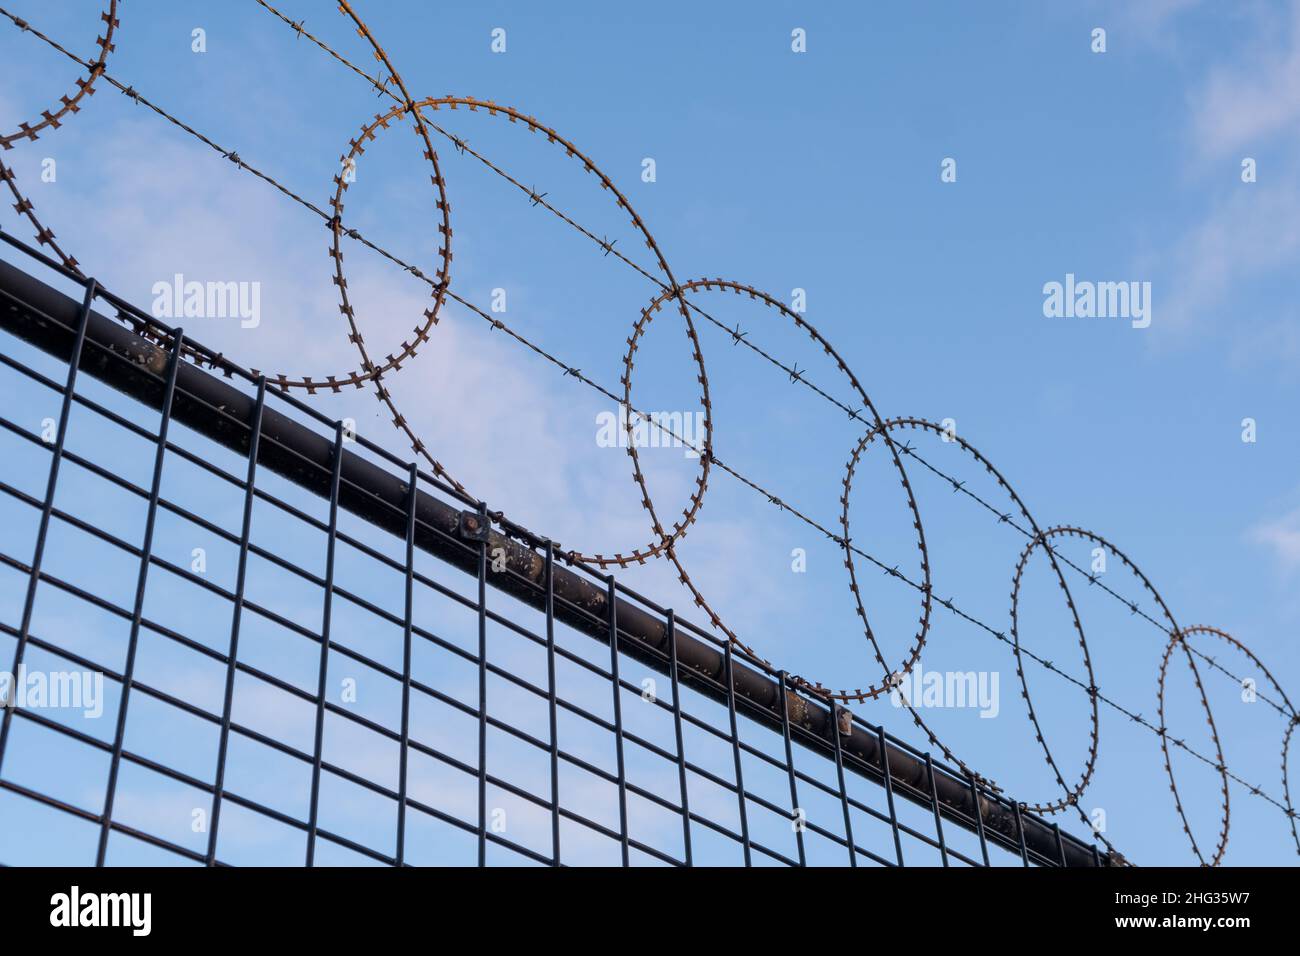 Looking up at circular barbed wire fence against blue sky diagonal juxtaposition Stock Photo